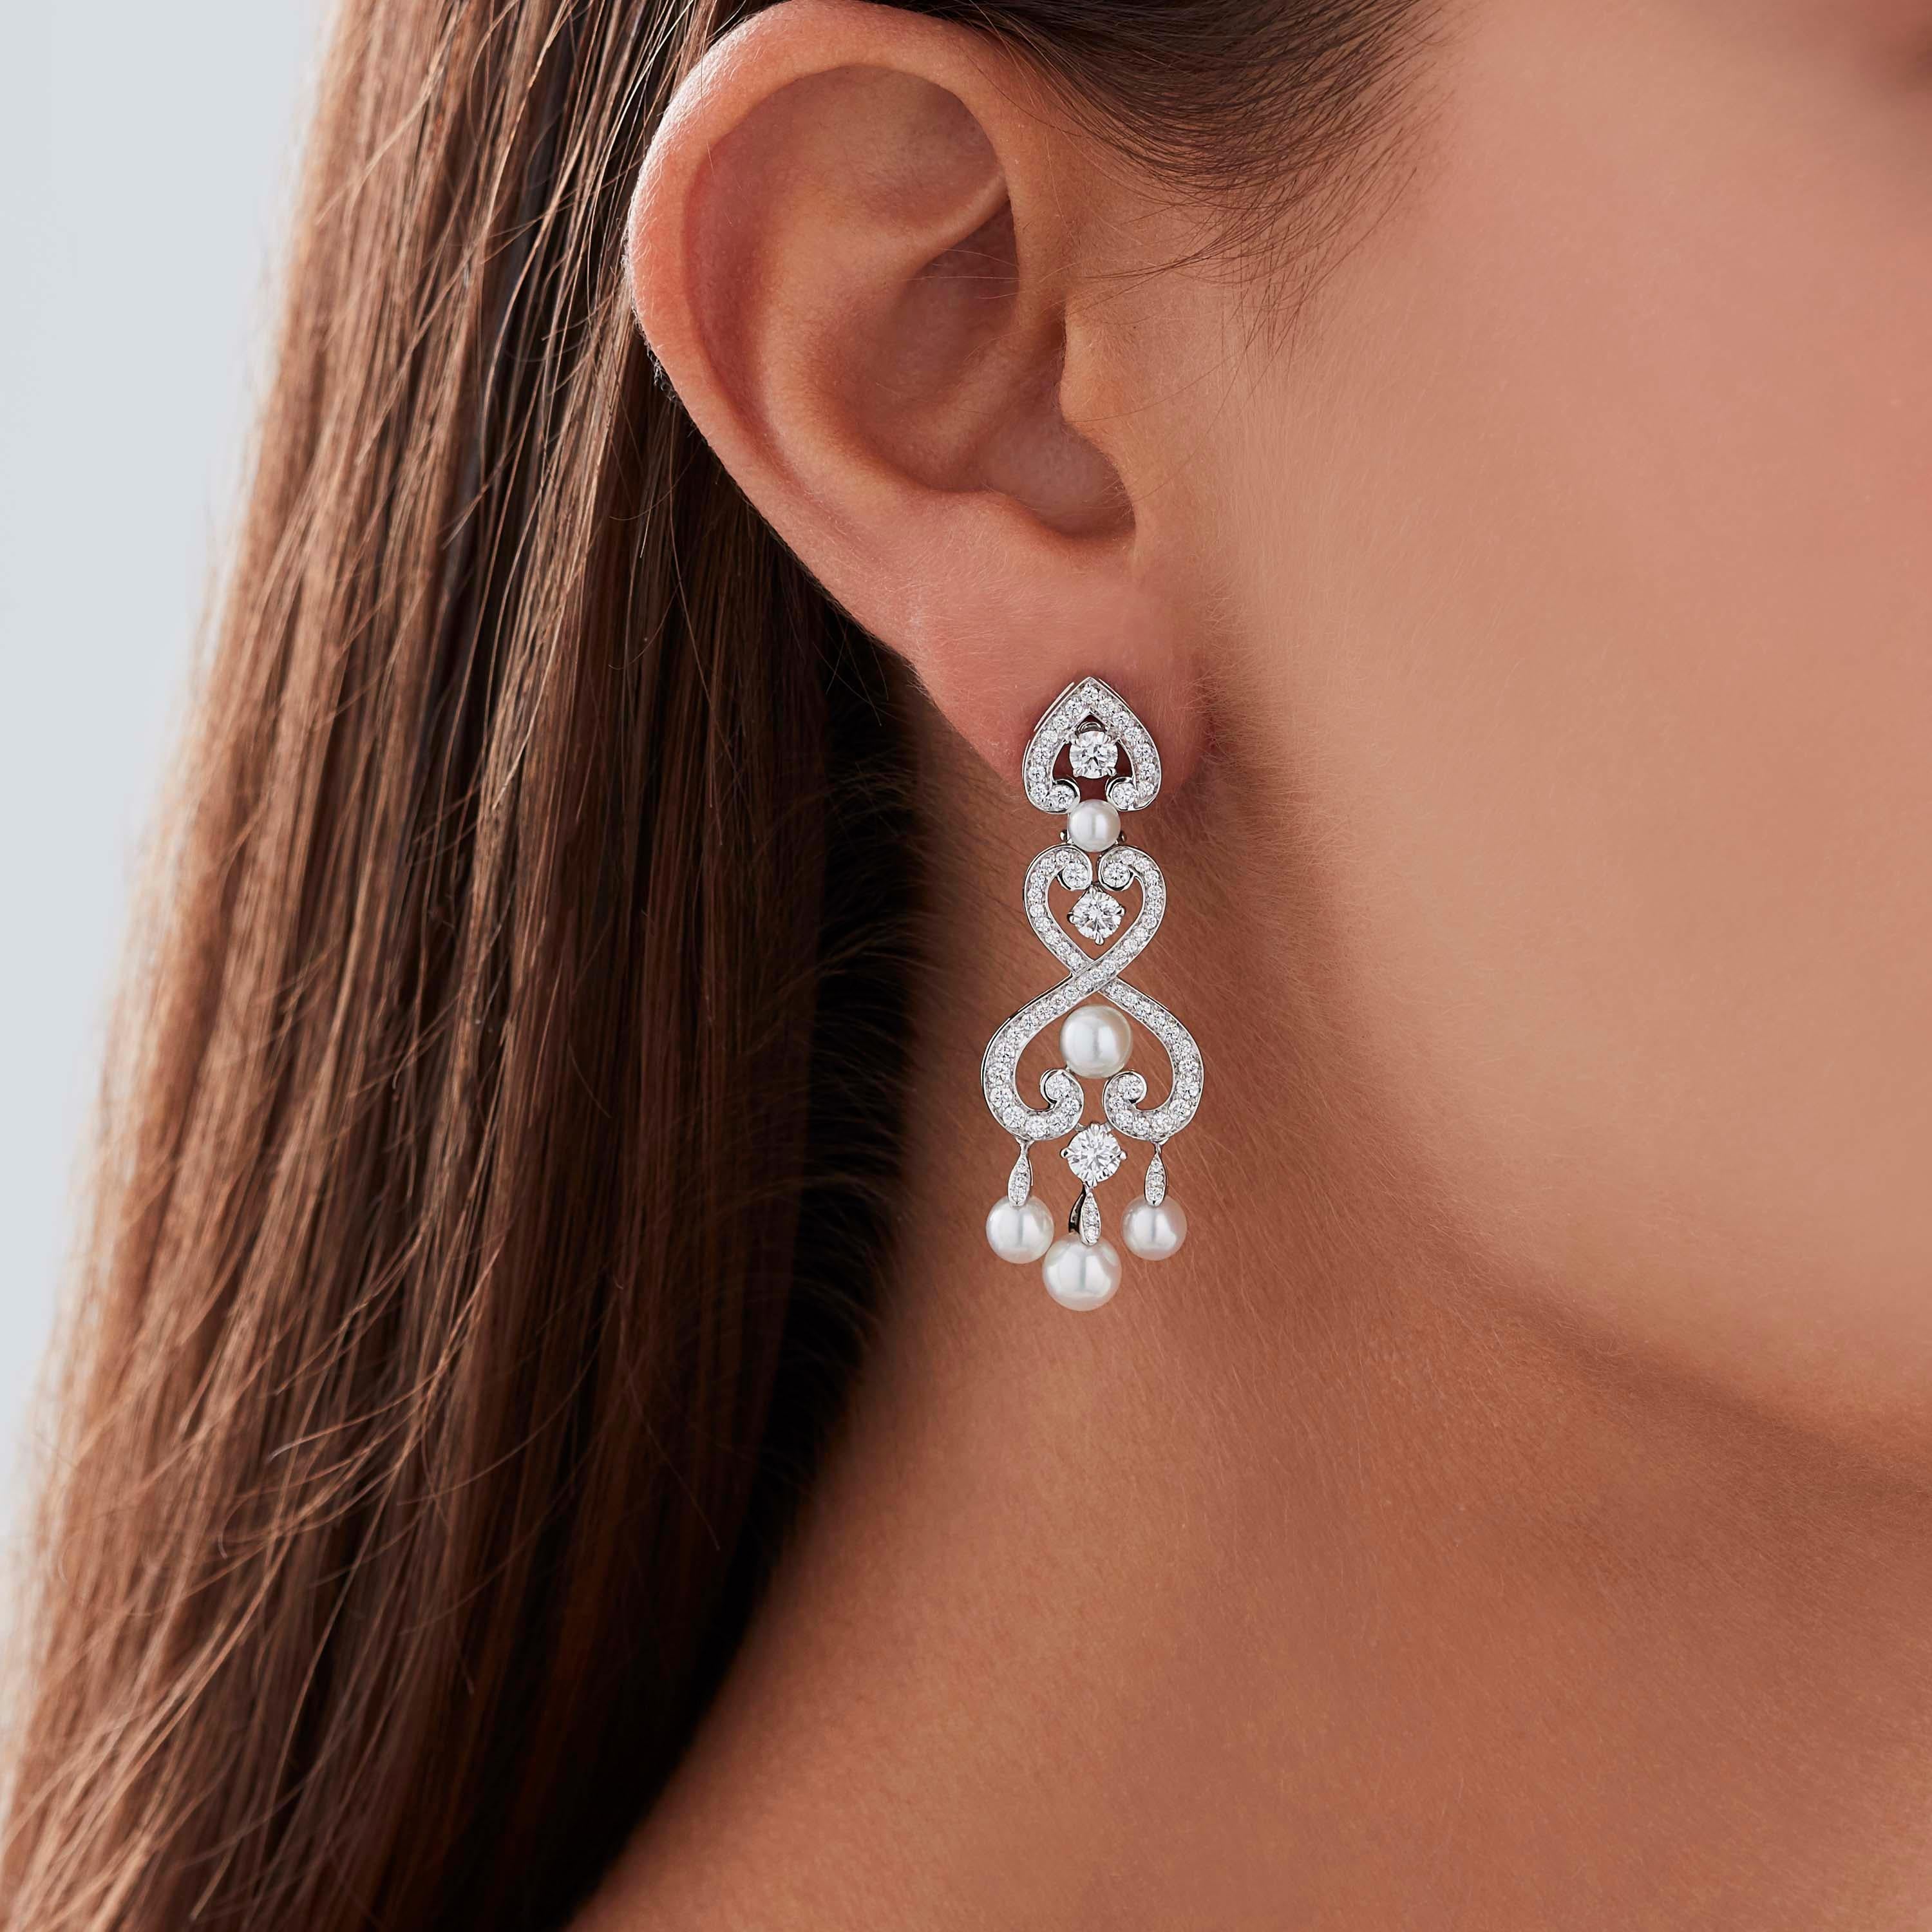 A House of Garrard pair of 18 karat white gold earrings from the 'Regal Cascade' collection, set with round white diamonds and round white cultured pearls. 

154 round white diamonds weighing: 1.81cts
10 round white cultured pearls

The House of